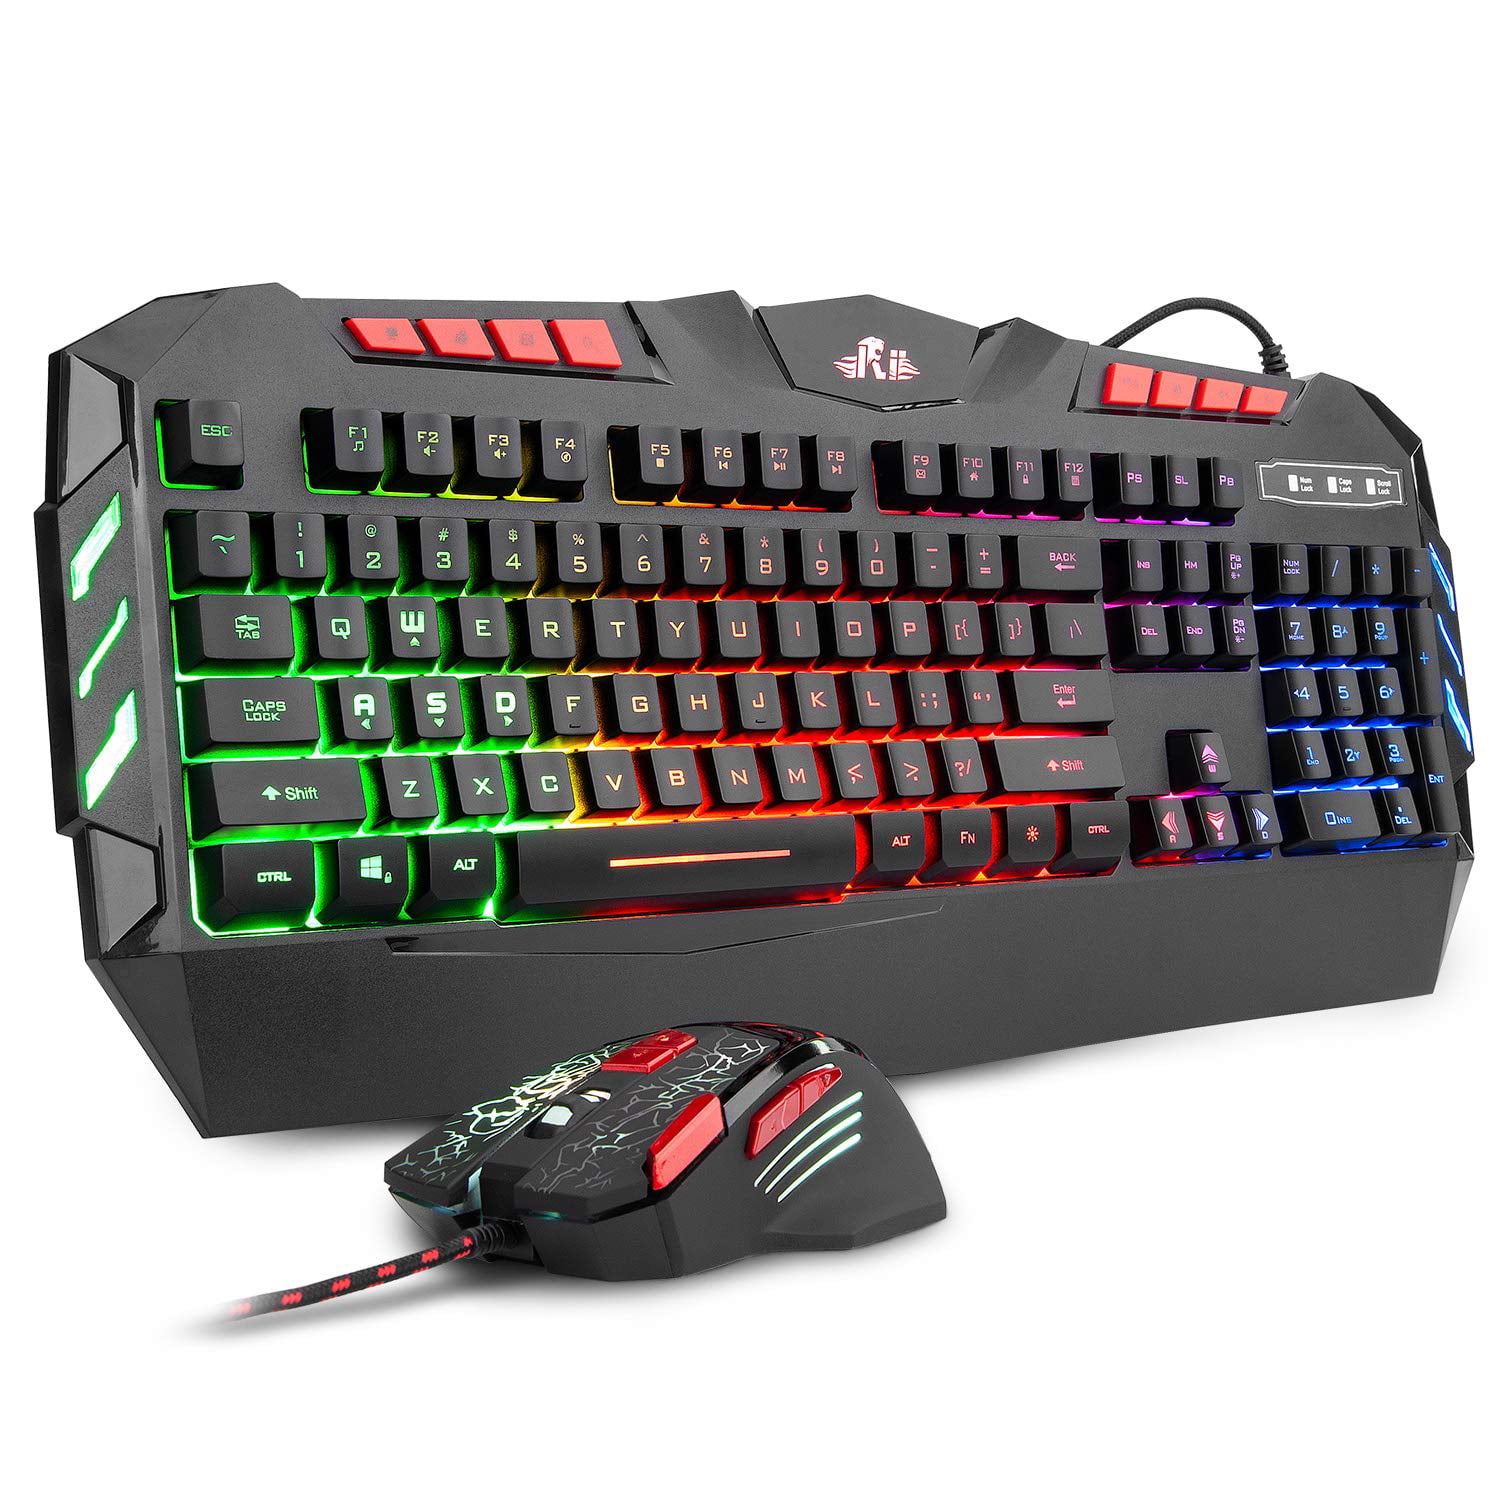 Rii RGB LED Backlight Wired Gaming Keyboard and Mouse Combo,PC 